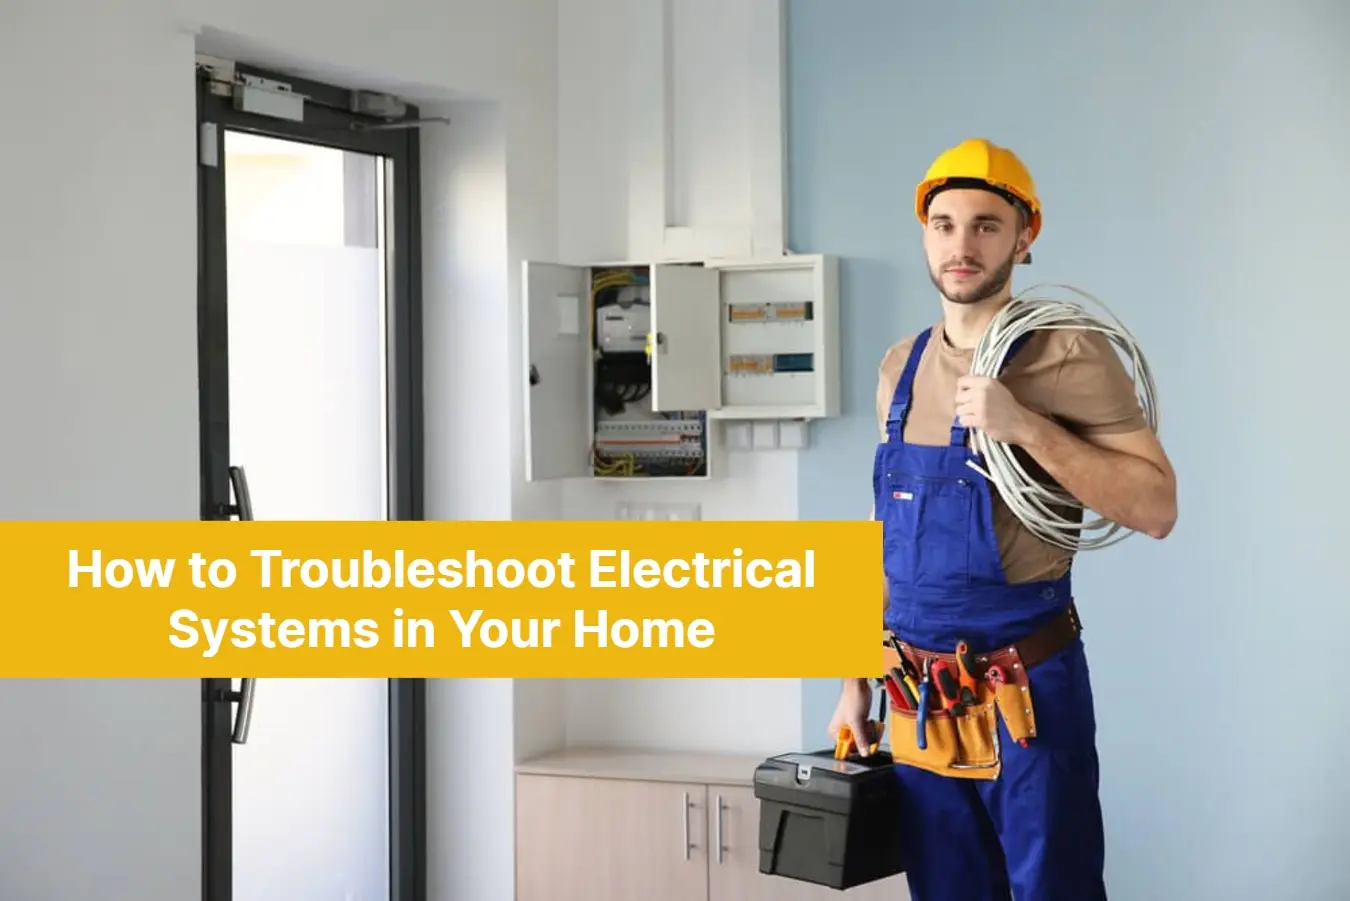 How to Troubleshoot Electrical Systems in Your Home